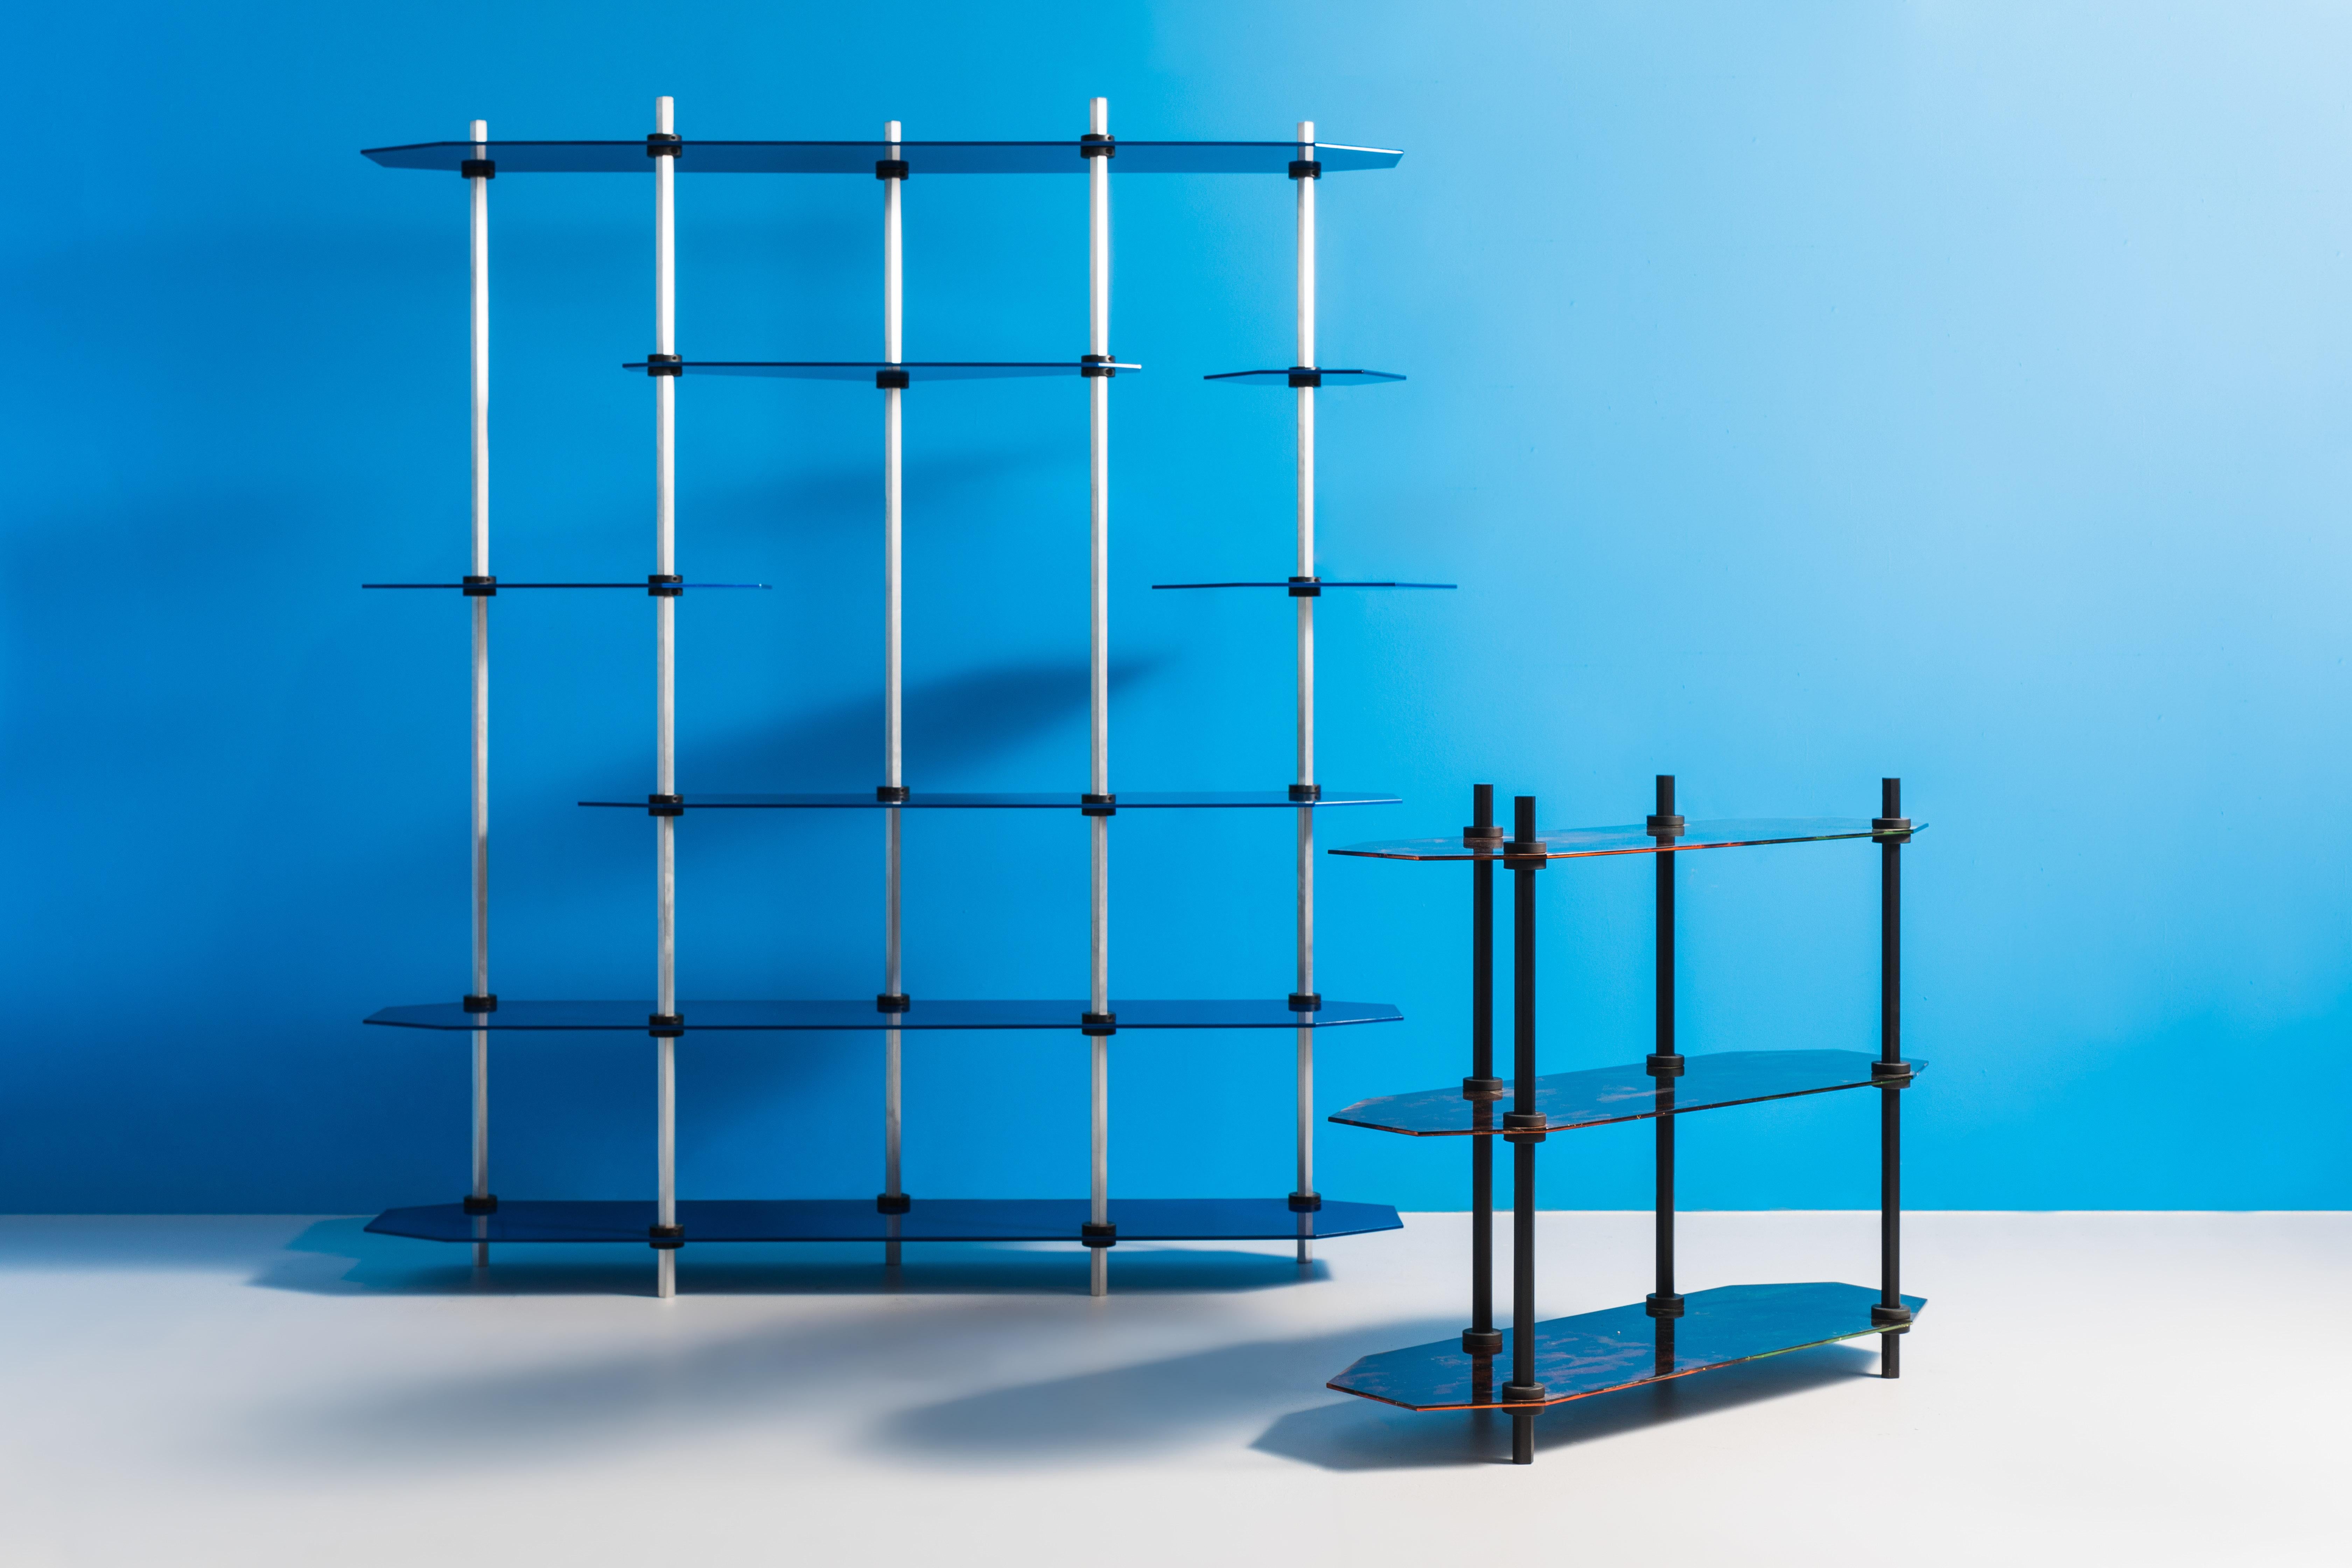 Hex Shelving is designed entirely around factory-made “shaft collars” which clamp onto the posts to secure the shelves. This blend of the low fi with ultra-high levels of finish quality gives the piece it's compelling uniqueness. 

A wide variety